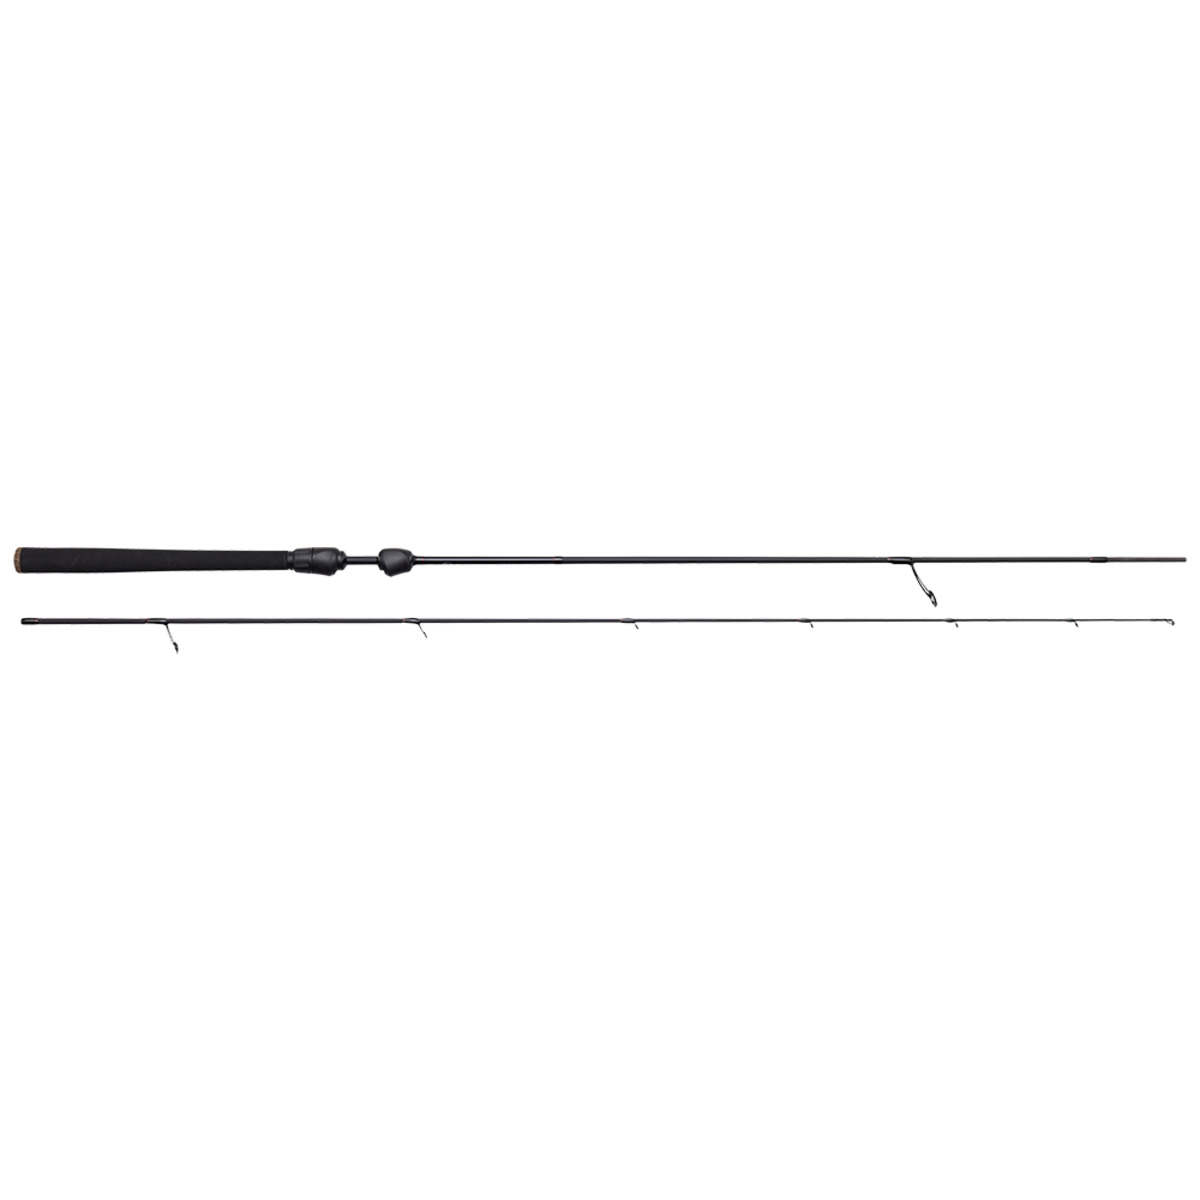 Ron Thompson Trout And Perch Stick - 6 ft 7in/206CM 2-8G 2SEC